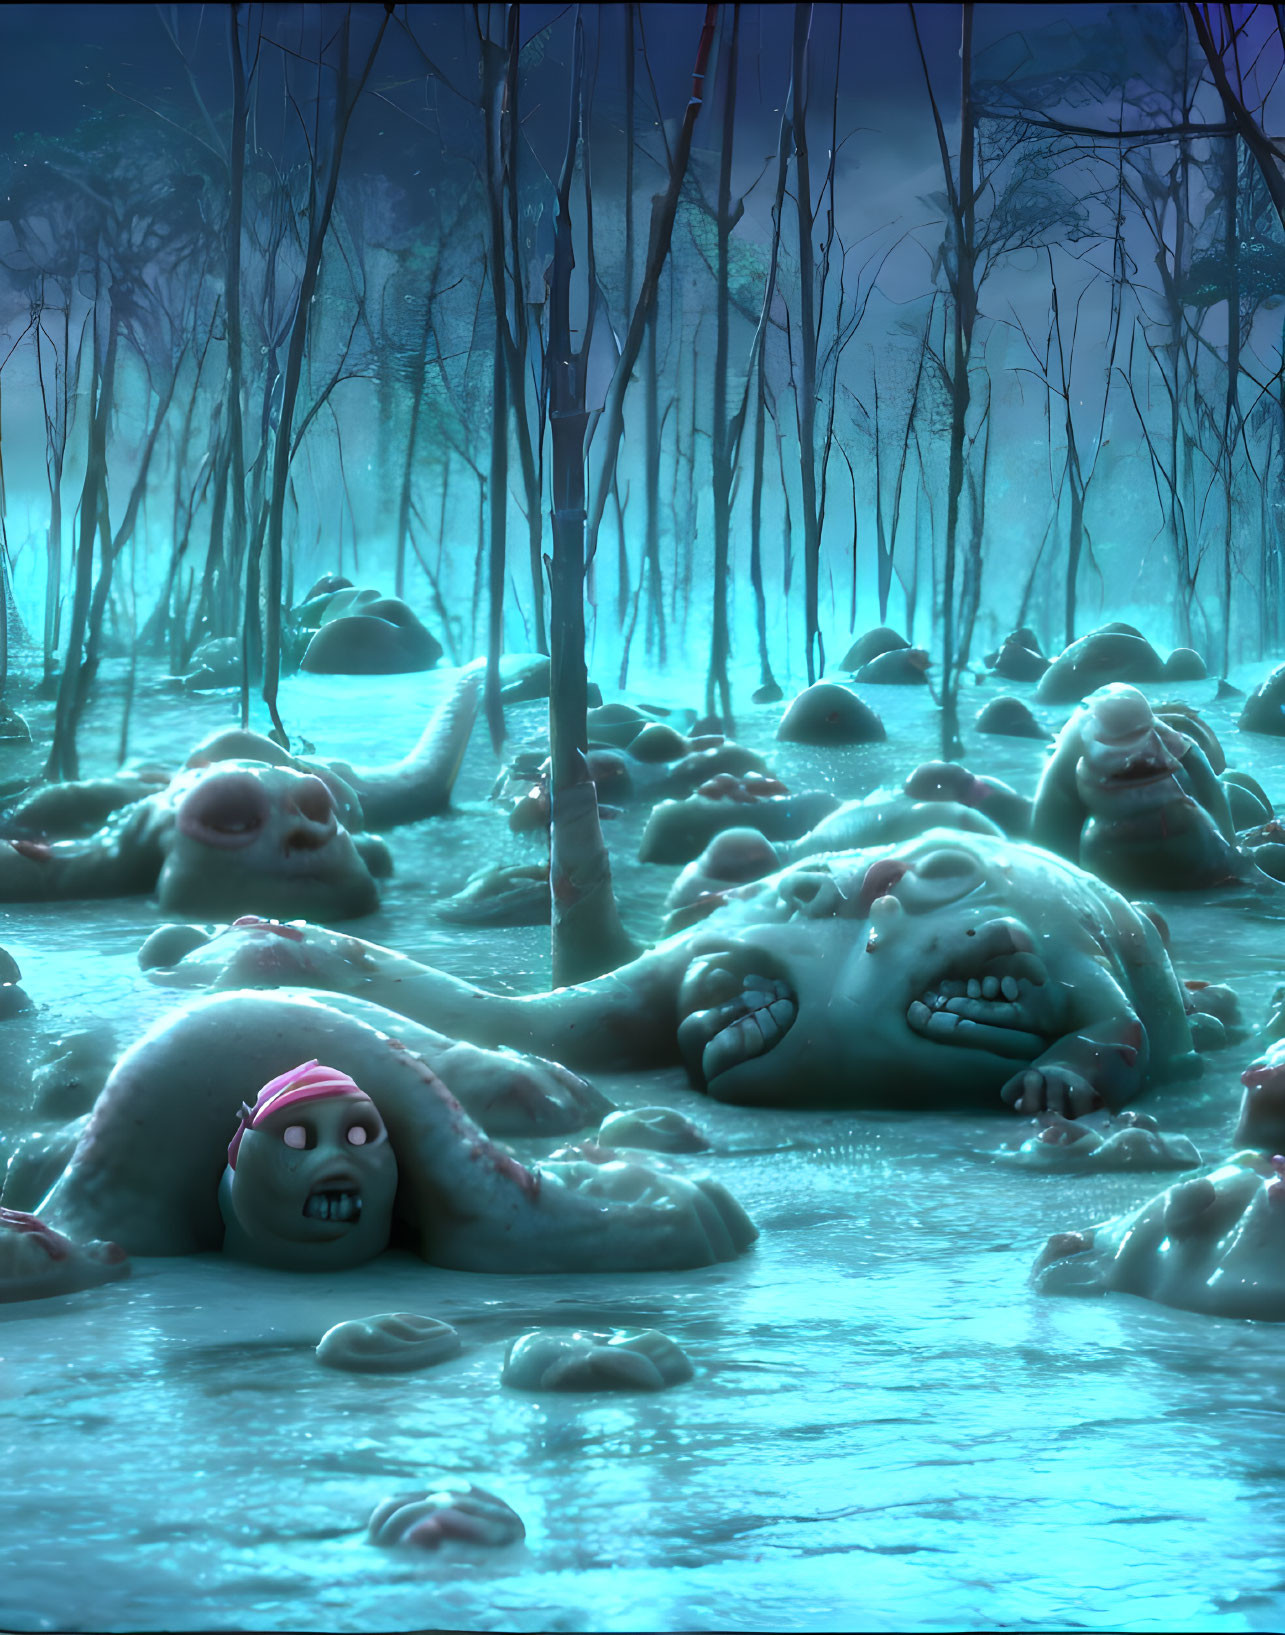 Spooky swamp with cartoonish monster-like creatures and eerie blue lighting